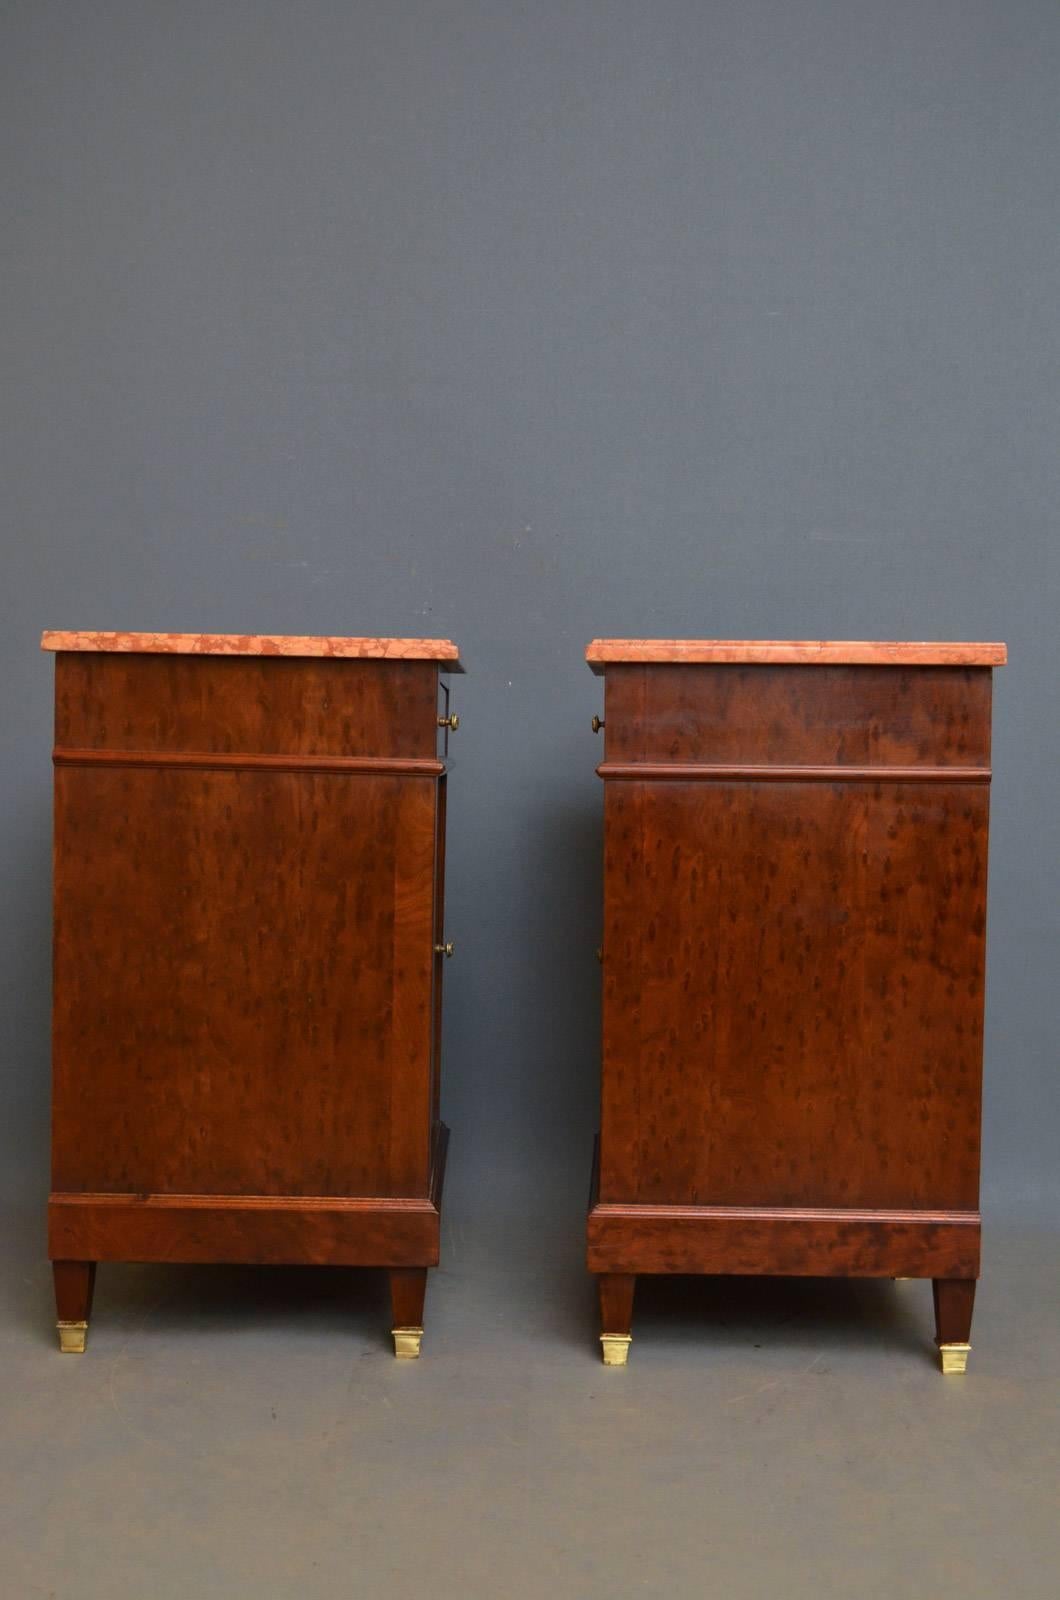 Late 19th Century Pair of Antique Bedside Cabinets